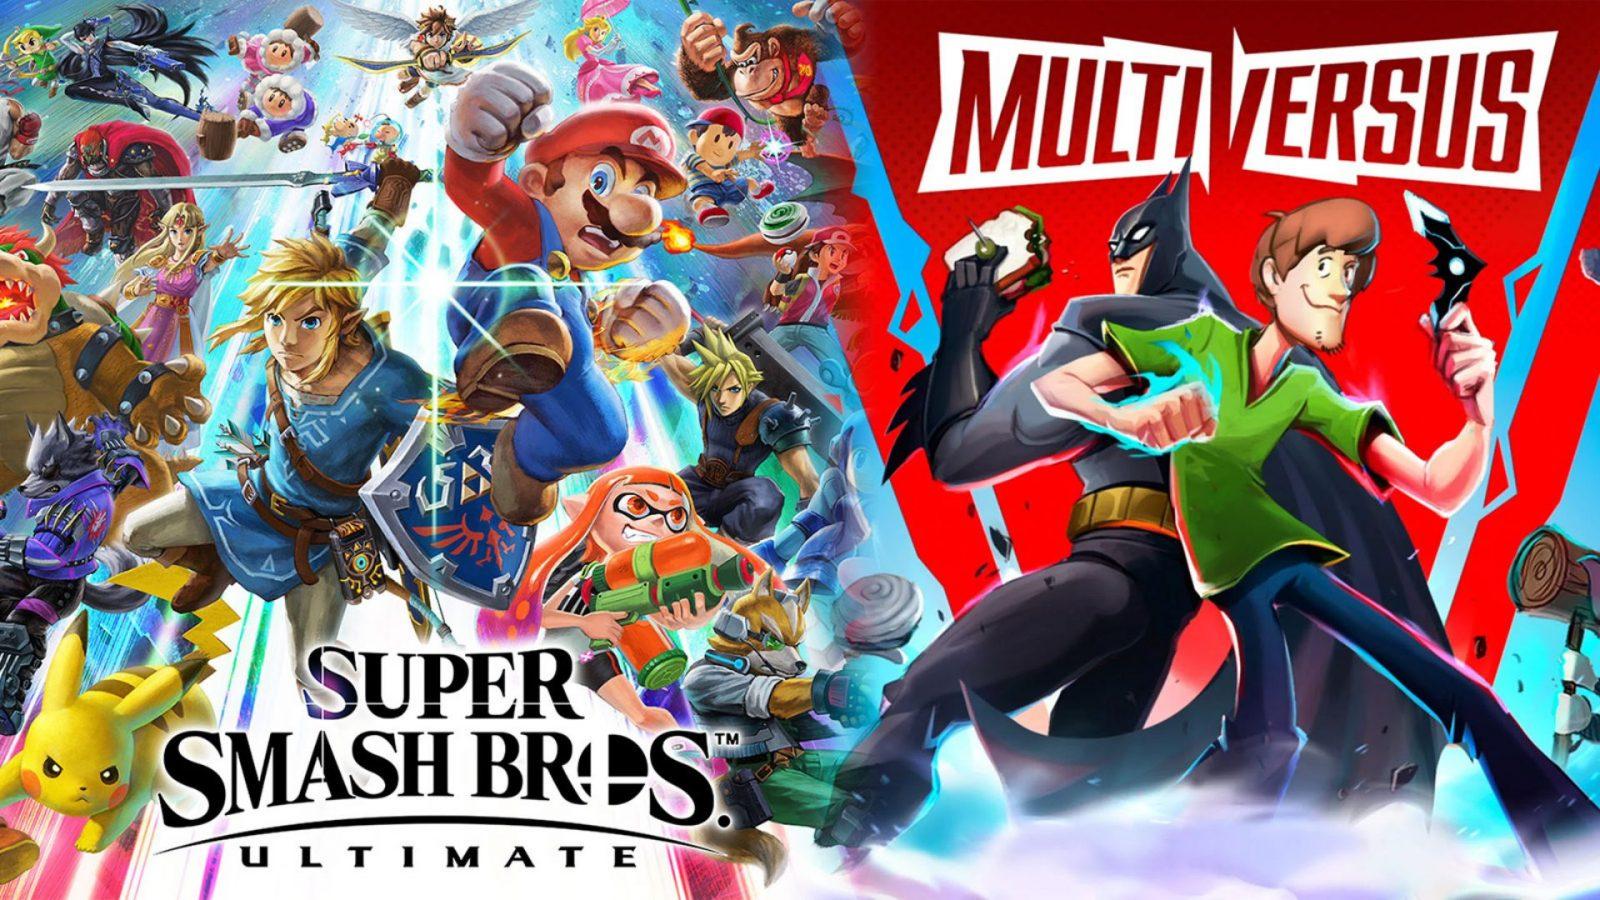 Warner Bros seem to be officially teasing Smash Ultimate rival